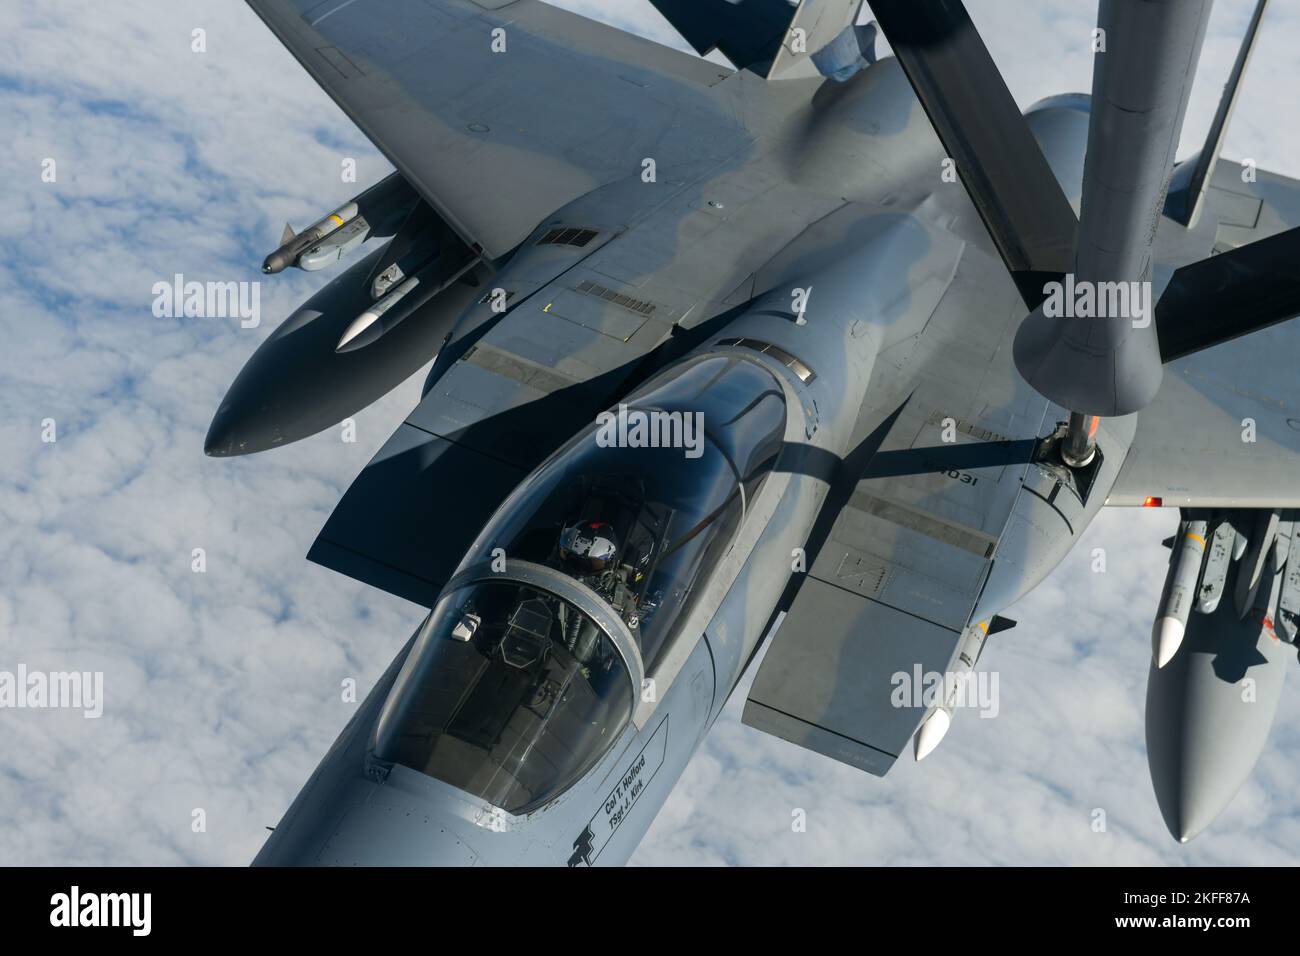 A U.S. Air Force F-15C Eagle from the 142nd Fighter Wing, Portland Air National Guard, gets refueled by a KC-135 Stratotanker from the 92nd Air Refueling Wing, Fairchild Air Force Base, during North American Aerospace Defense Command’s (NORAD) Operation Noble Defender (OND) over Canada's Pacific Coast near Vancouver Island, Sept. 14, 2022. NORAD and U.S. Northern Command are committed to deterring threats to U.S. interests and stability in the Arctic. Stock Photo